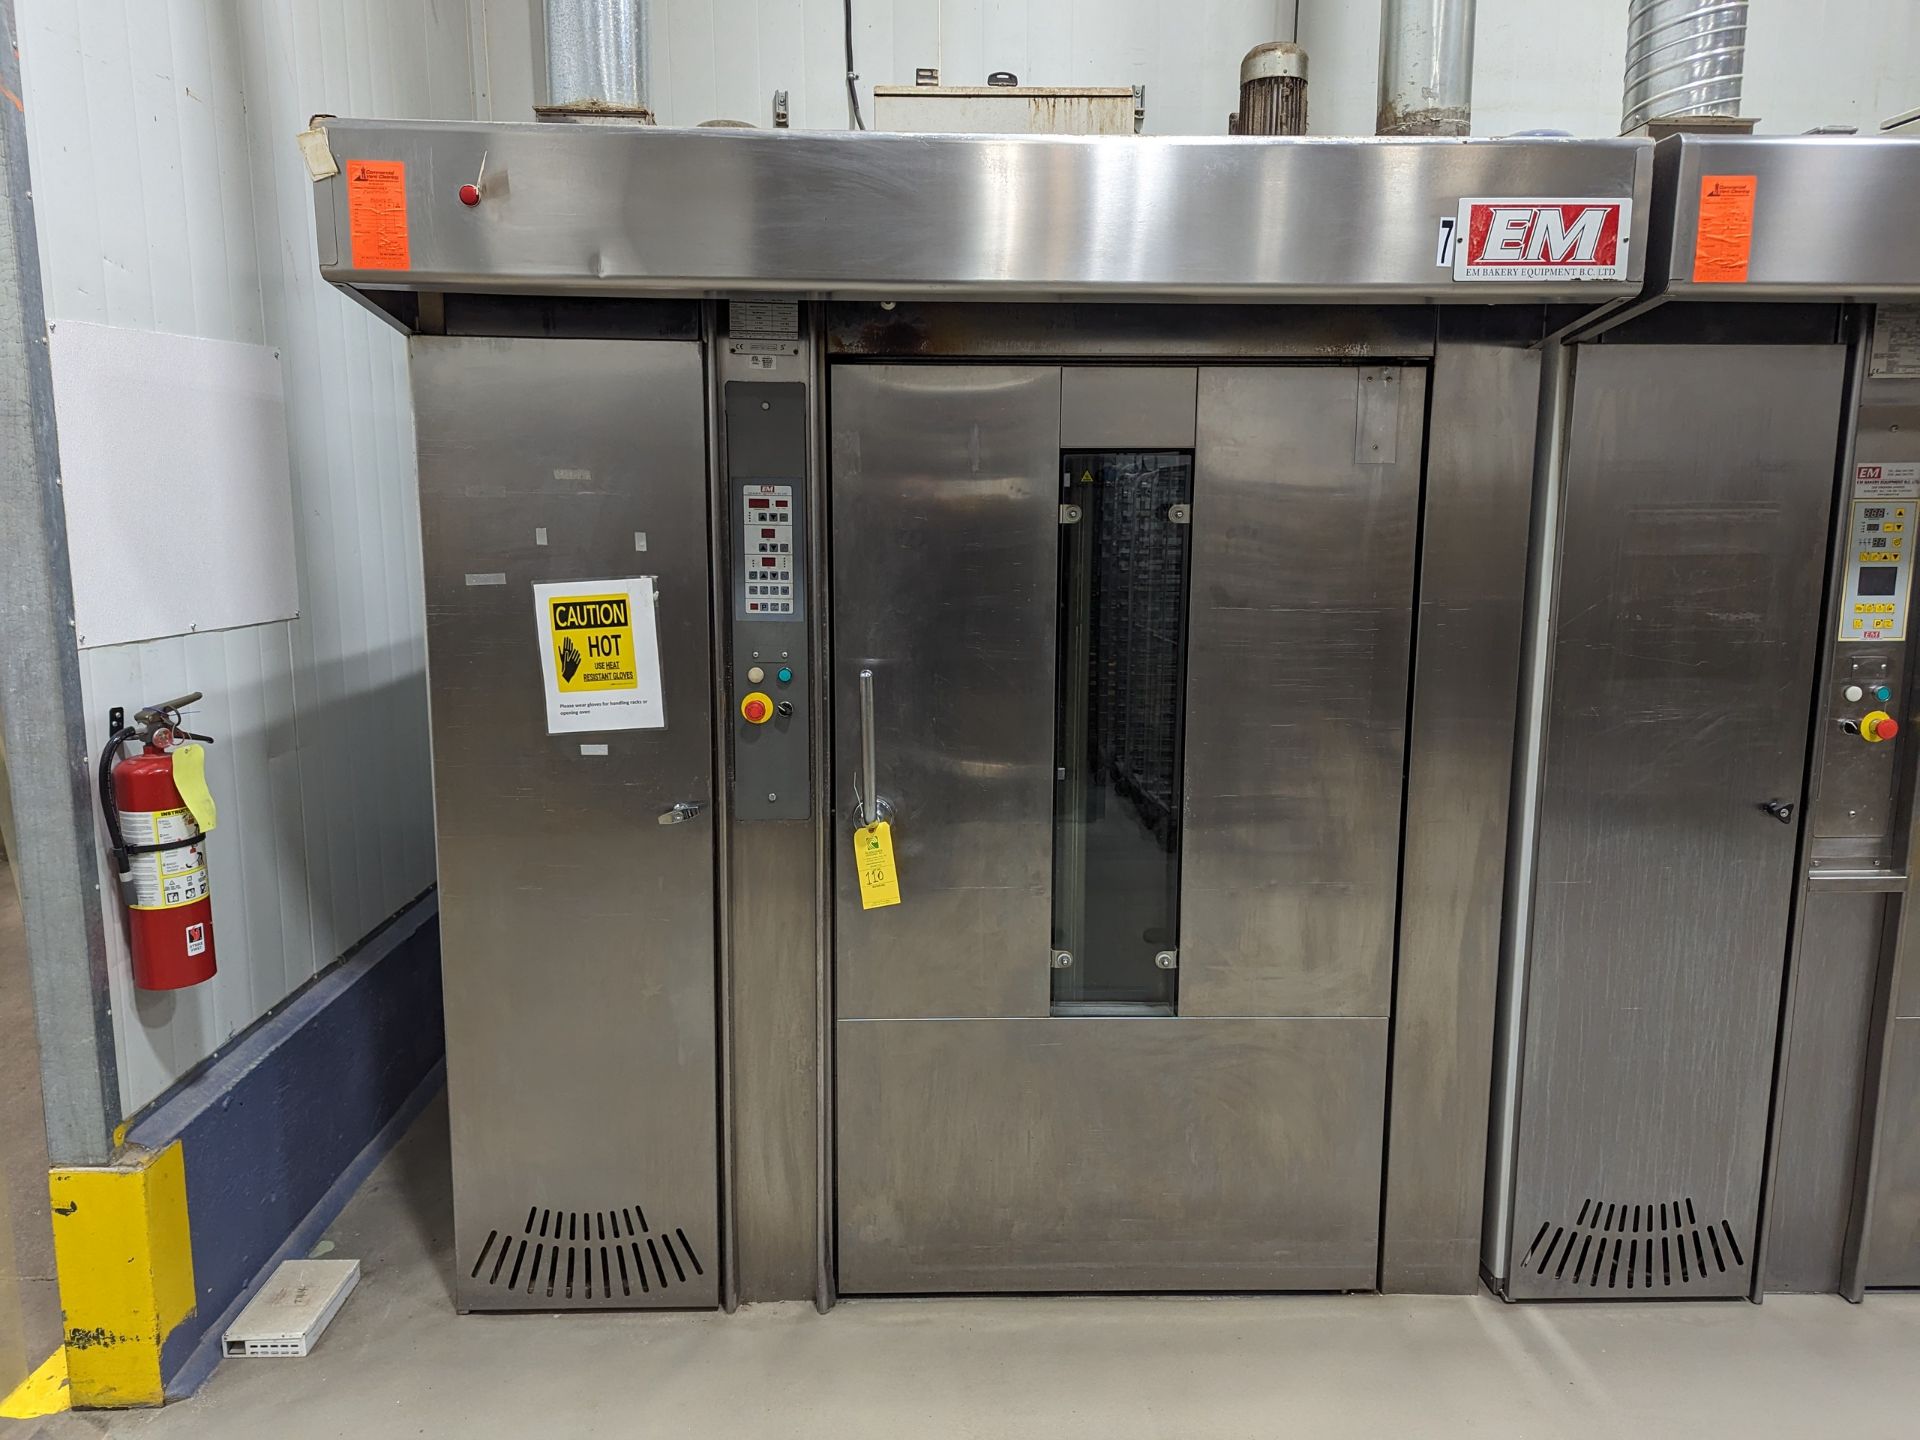 Bassanina Roller Oven, Dimensions LxWxH: 86x72x100